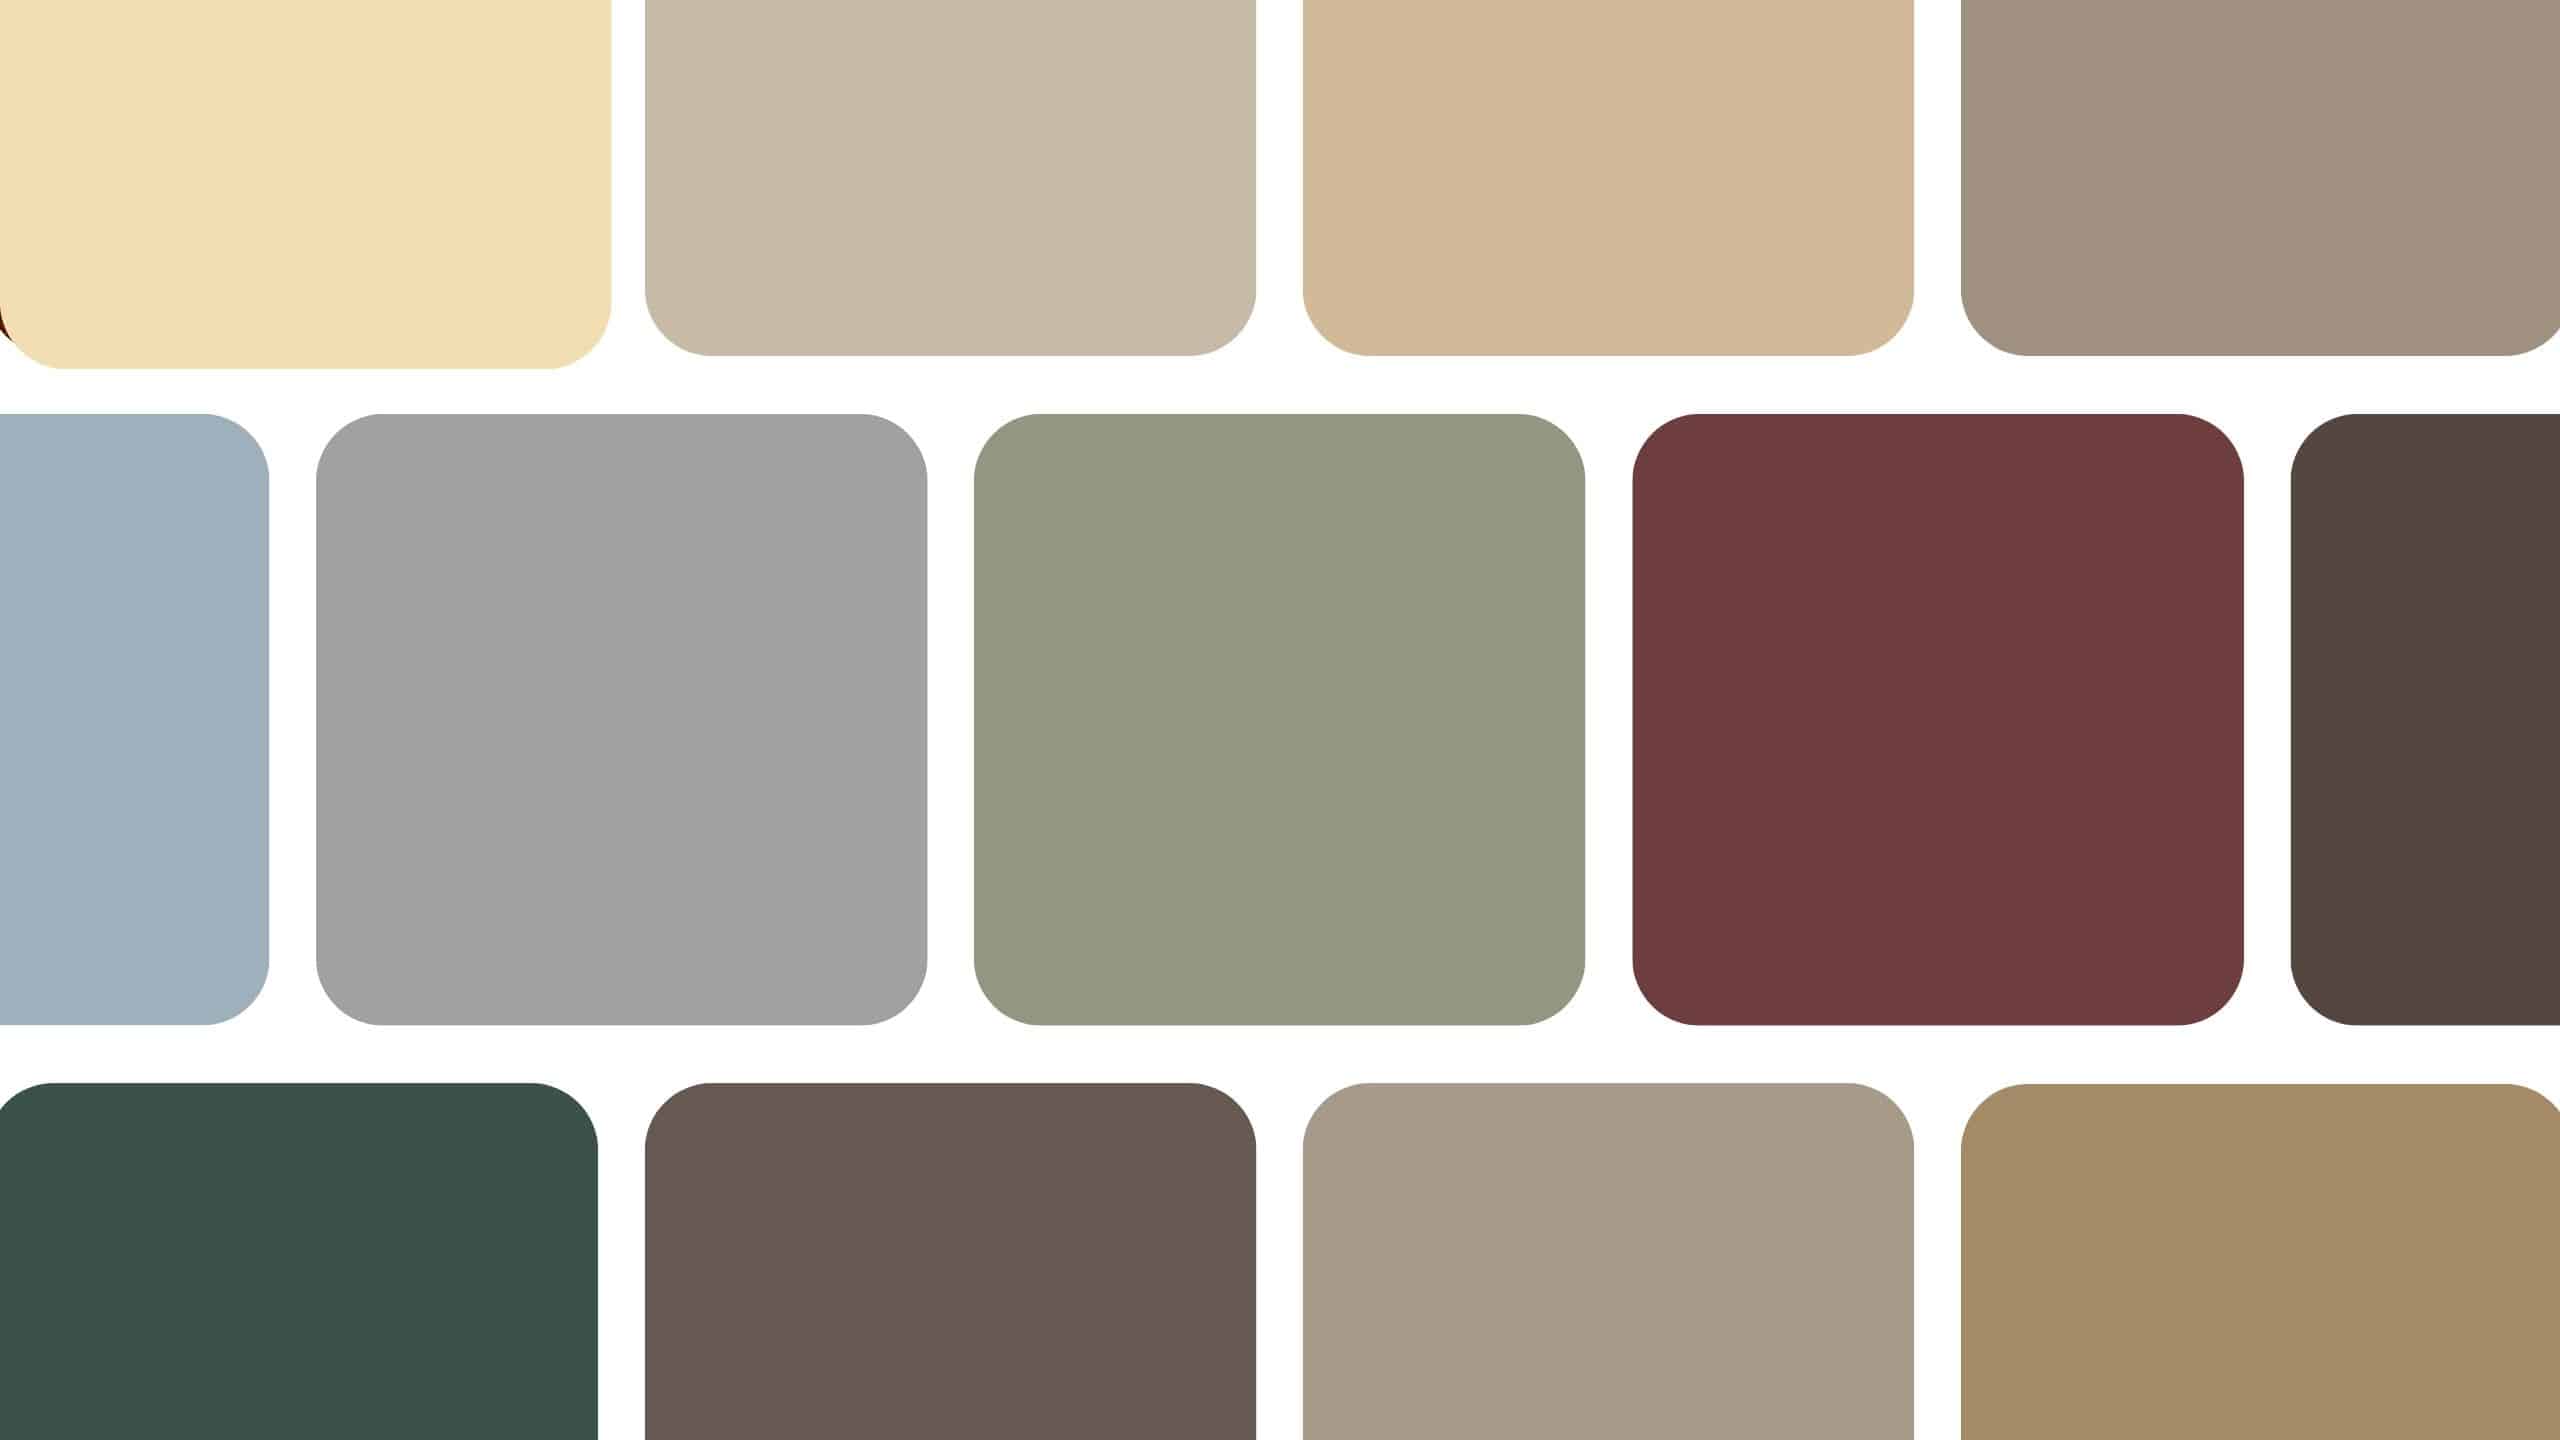 Shed color swatches